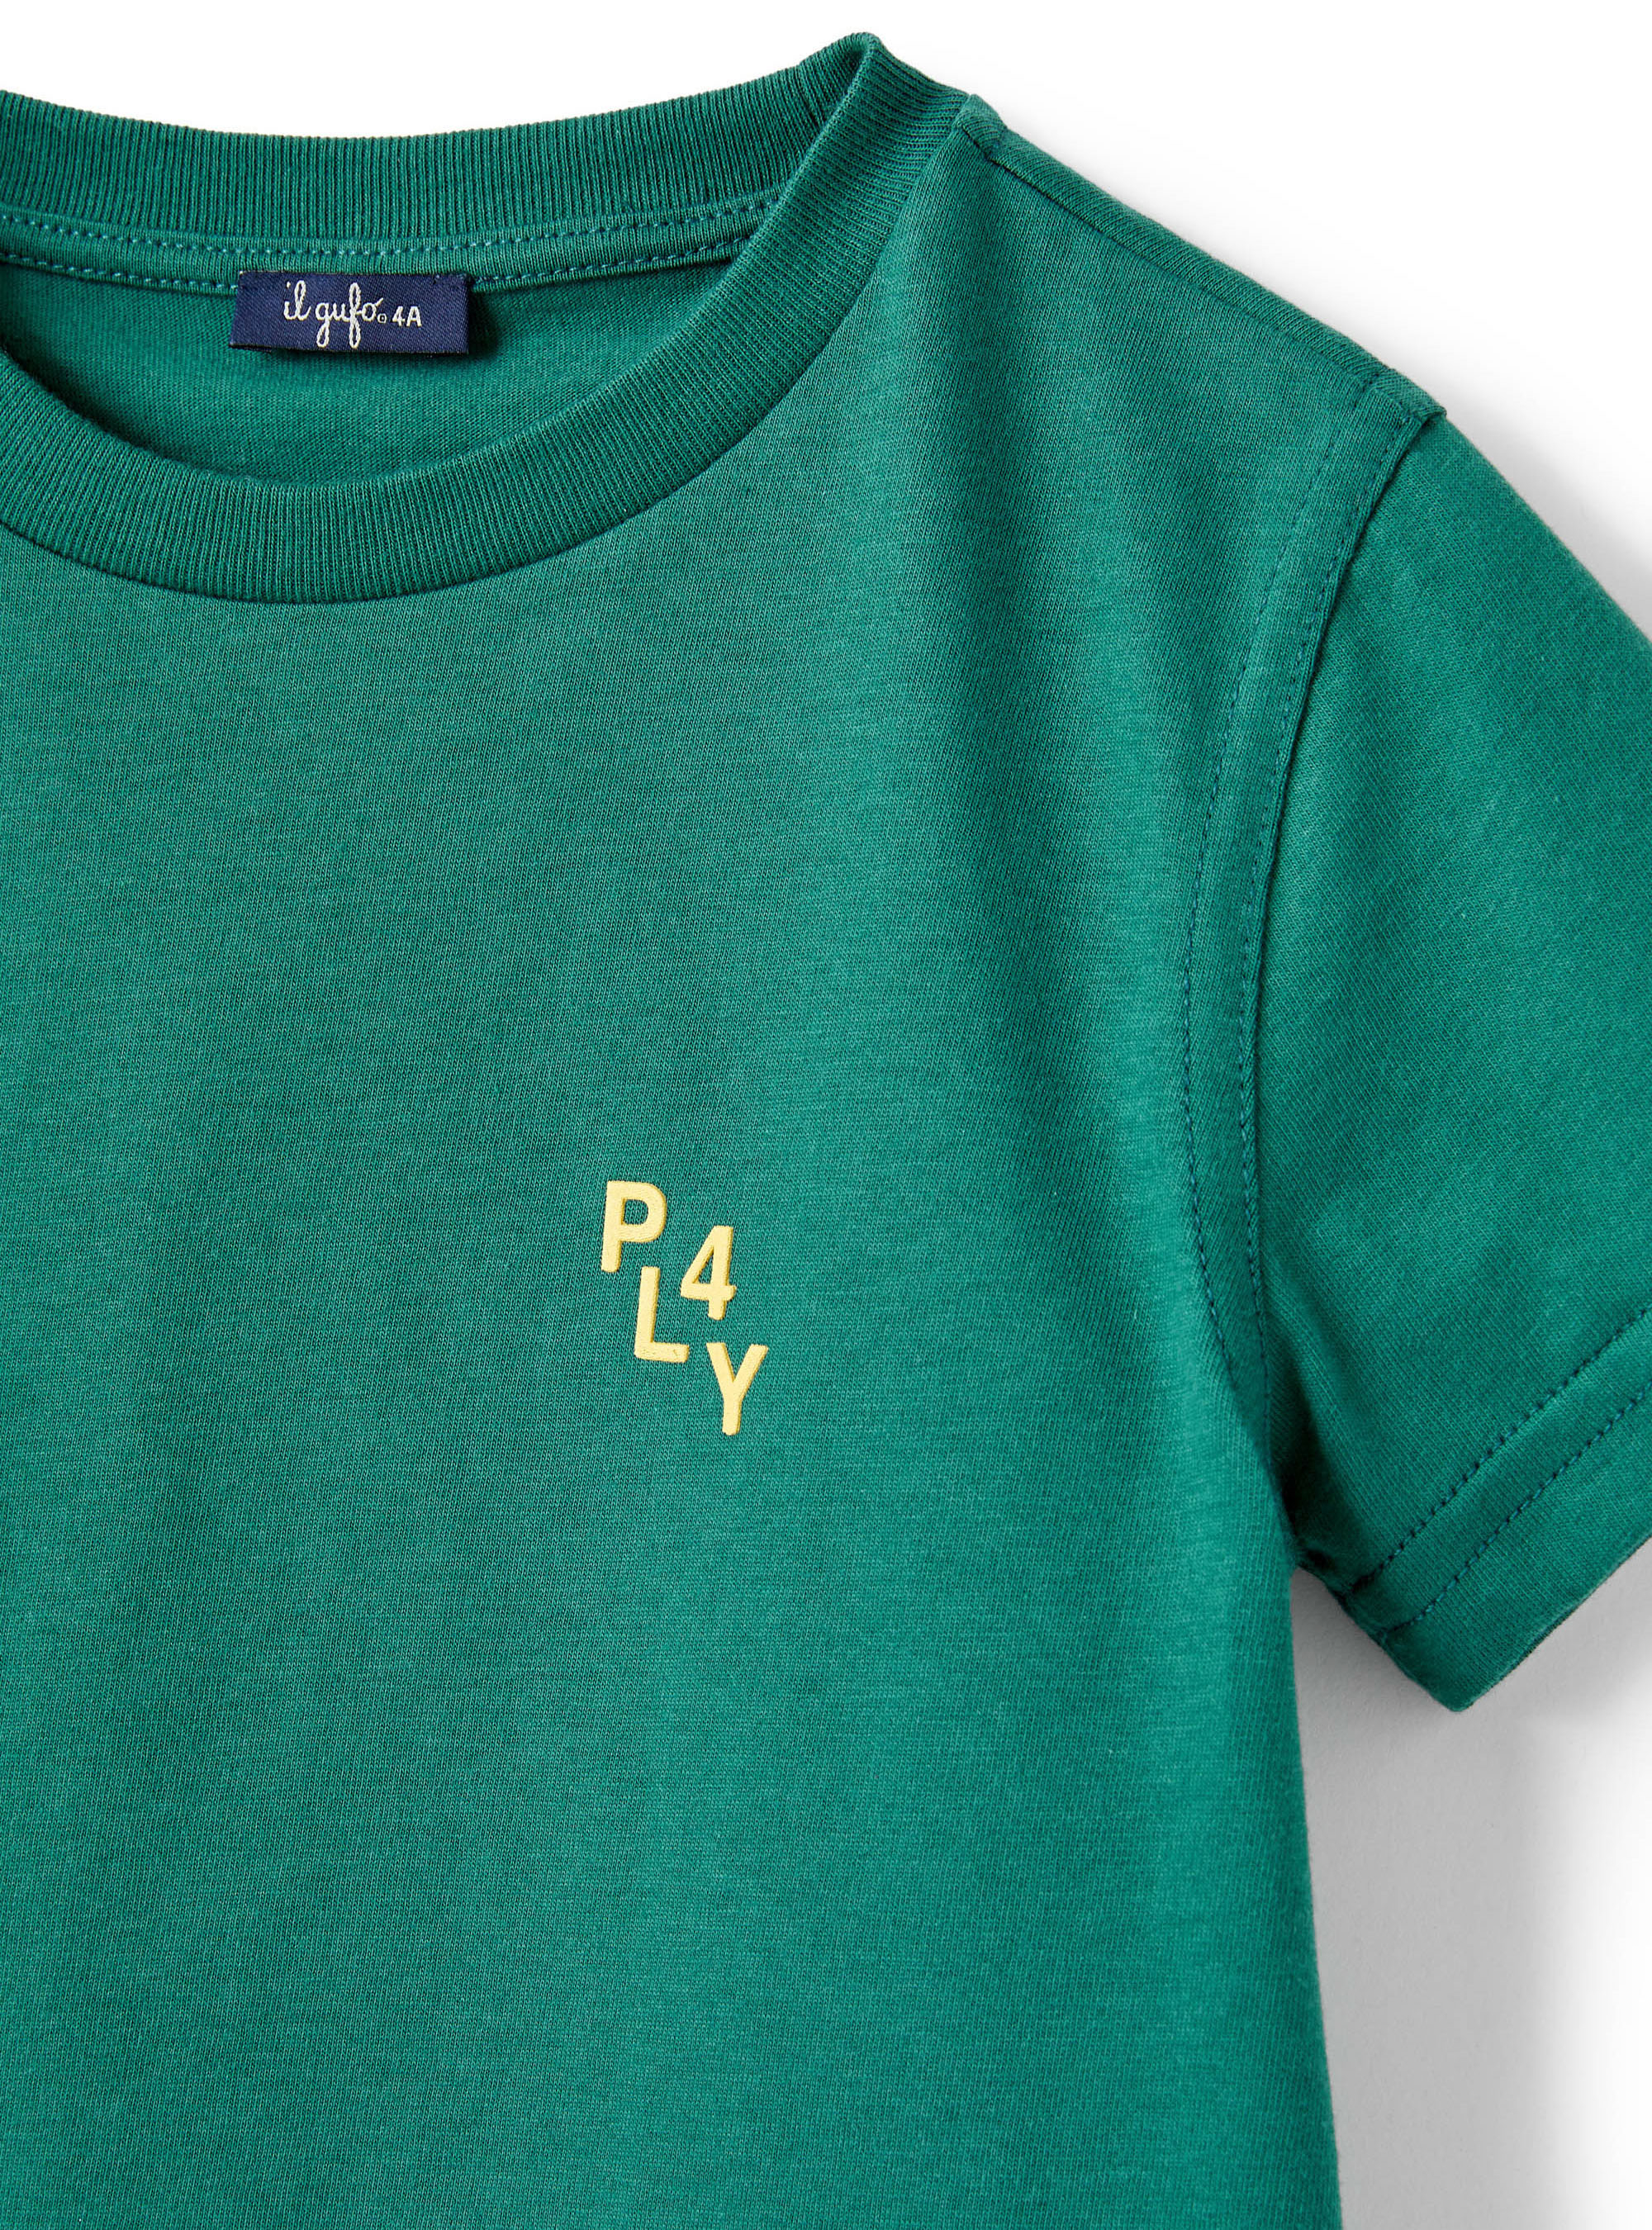 Green t-shirt with print on the back - Green | Il Gufo